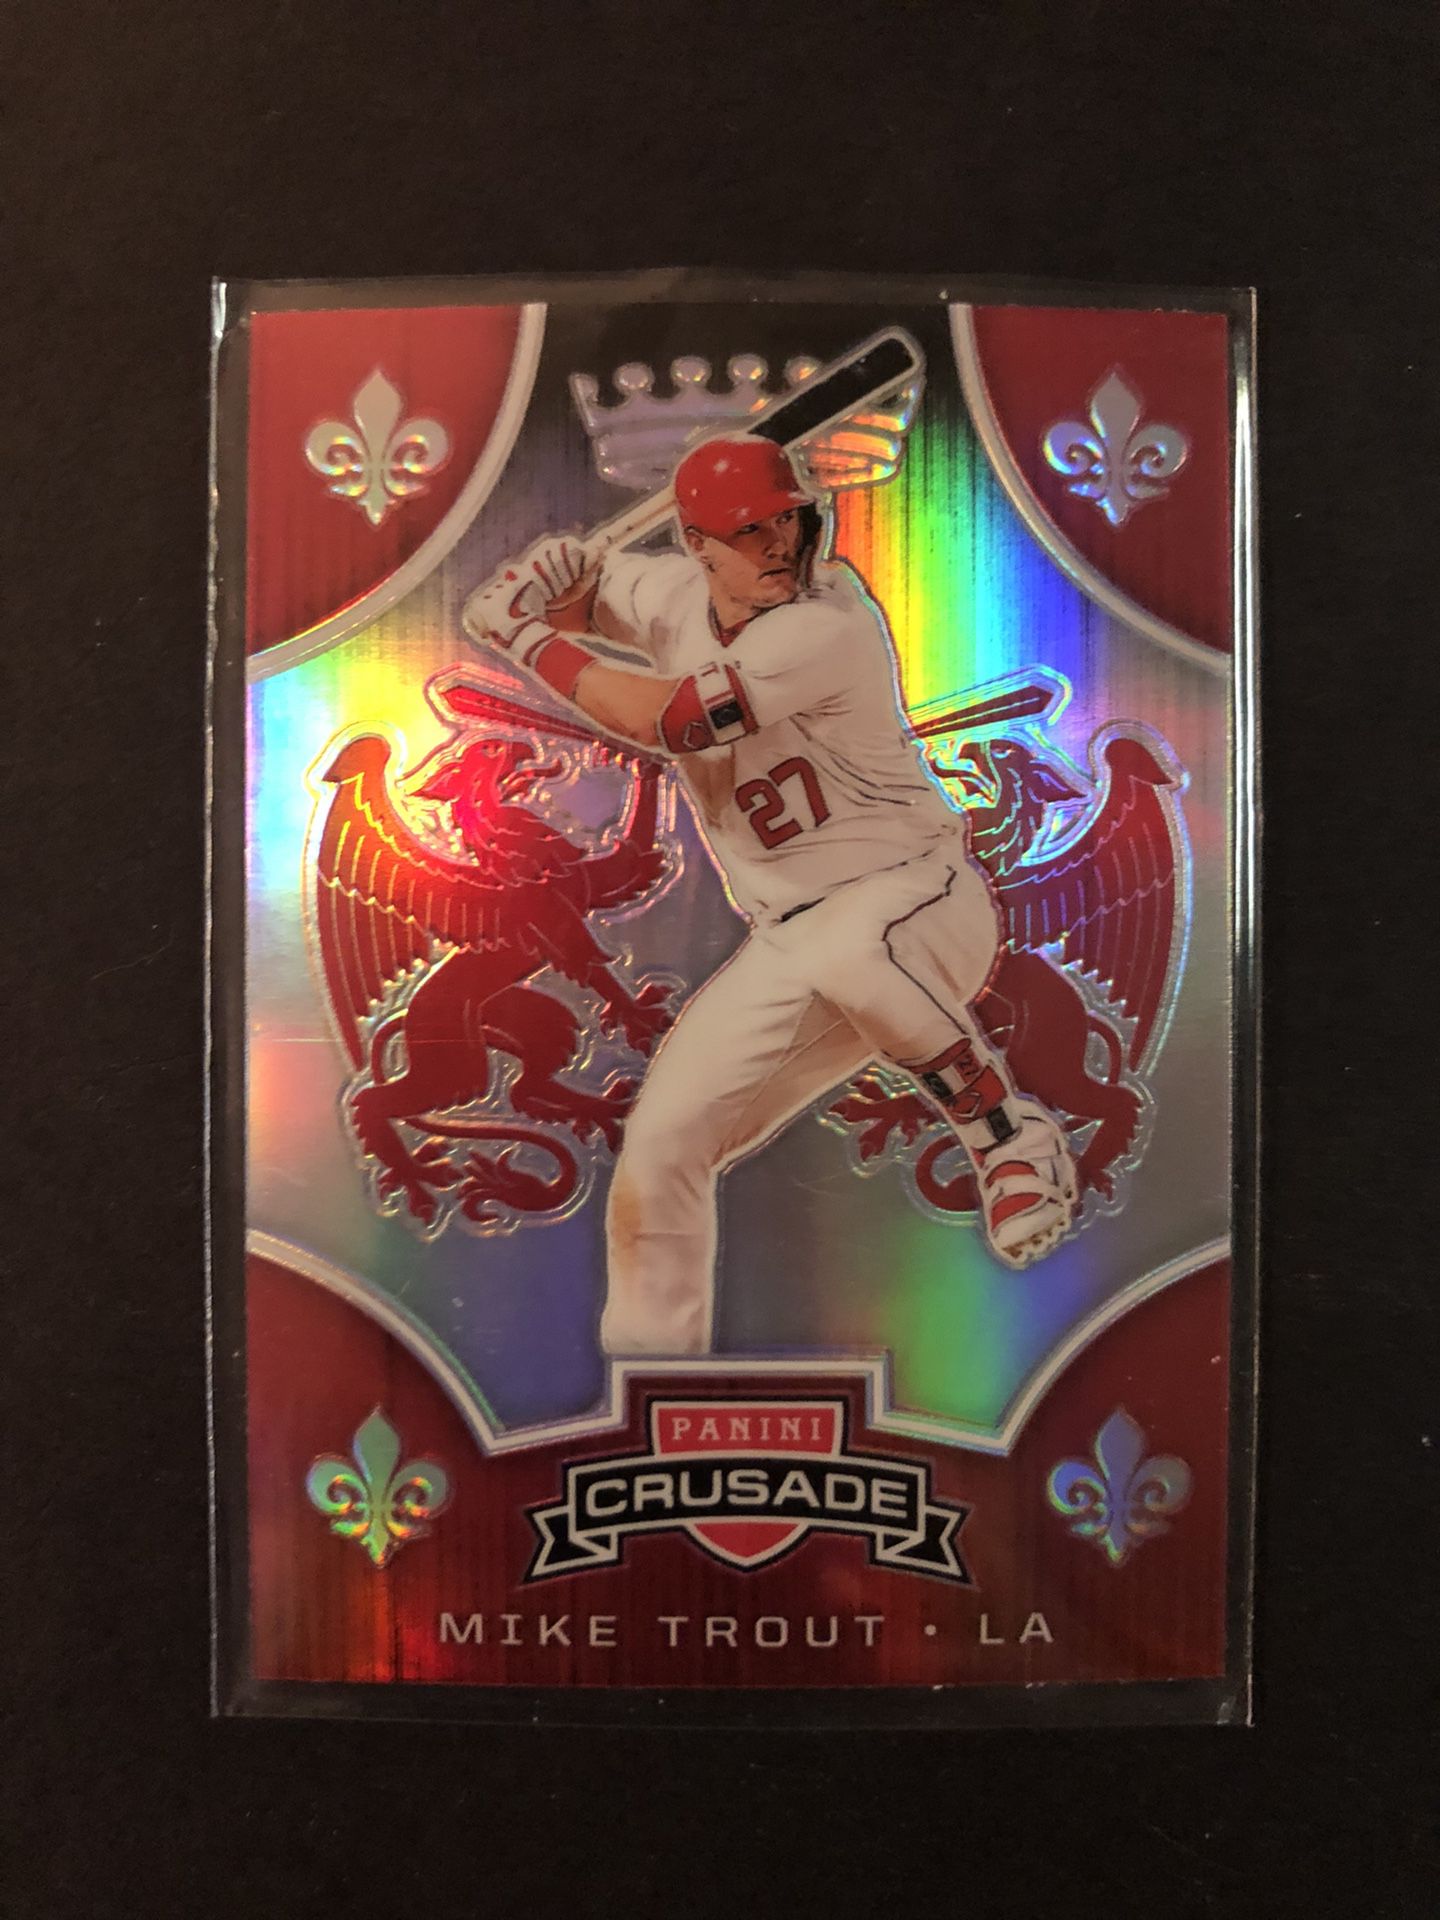 Mike Trout 2019 PANINI Baseball Card #8 ‘Crusade’ PRISM Refractor. Buy 20 Cards, Get 20% OFF. Mike Trout LA ANGELS Baseball Trading Card.